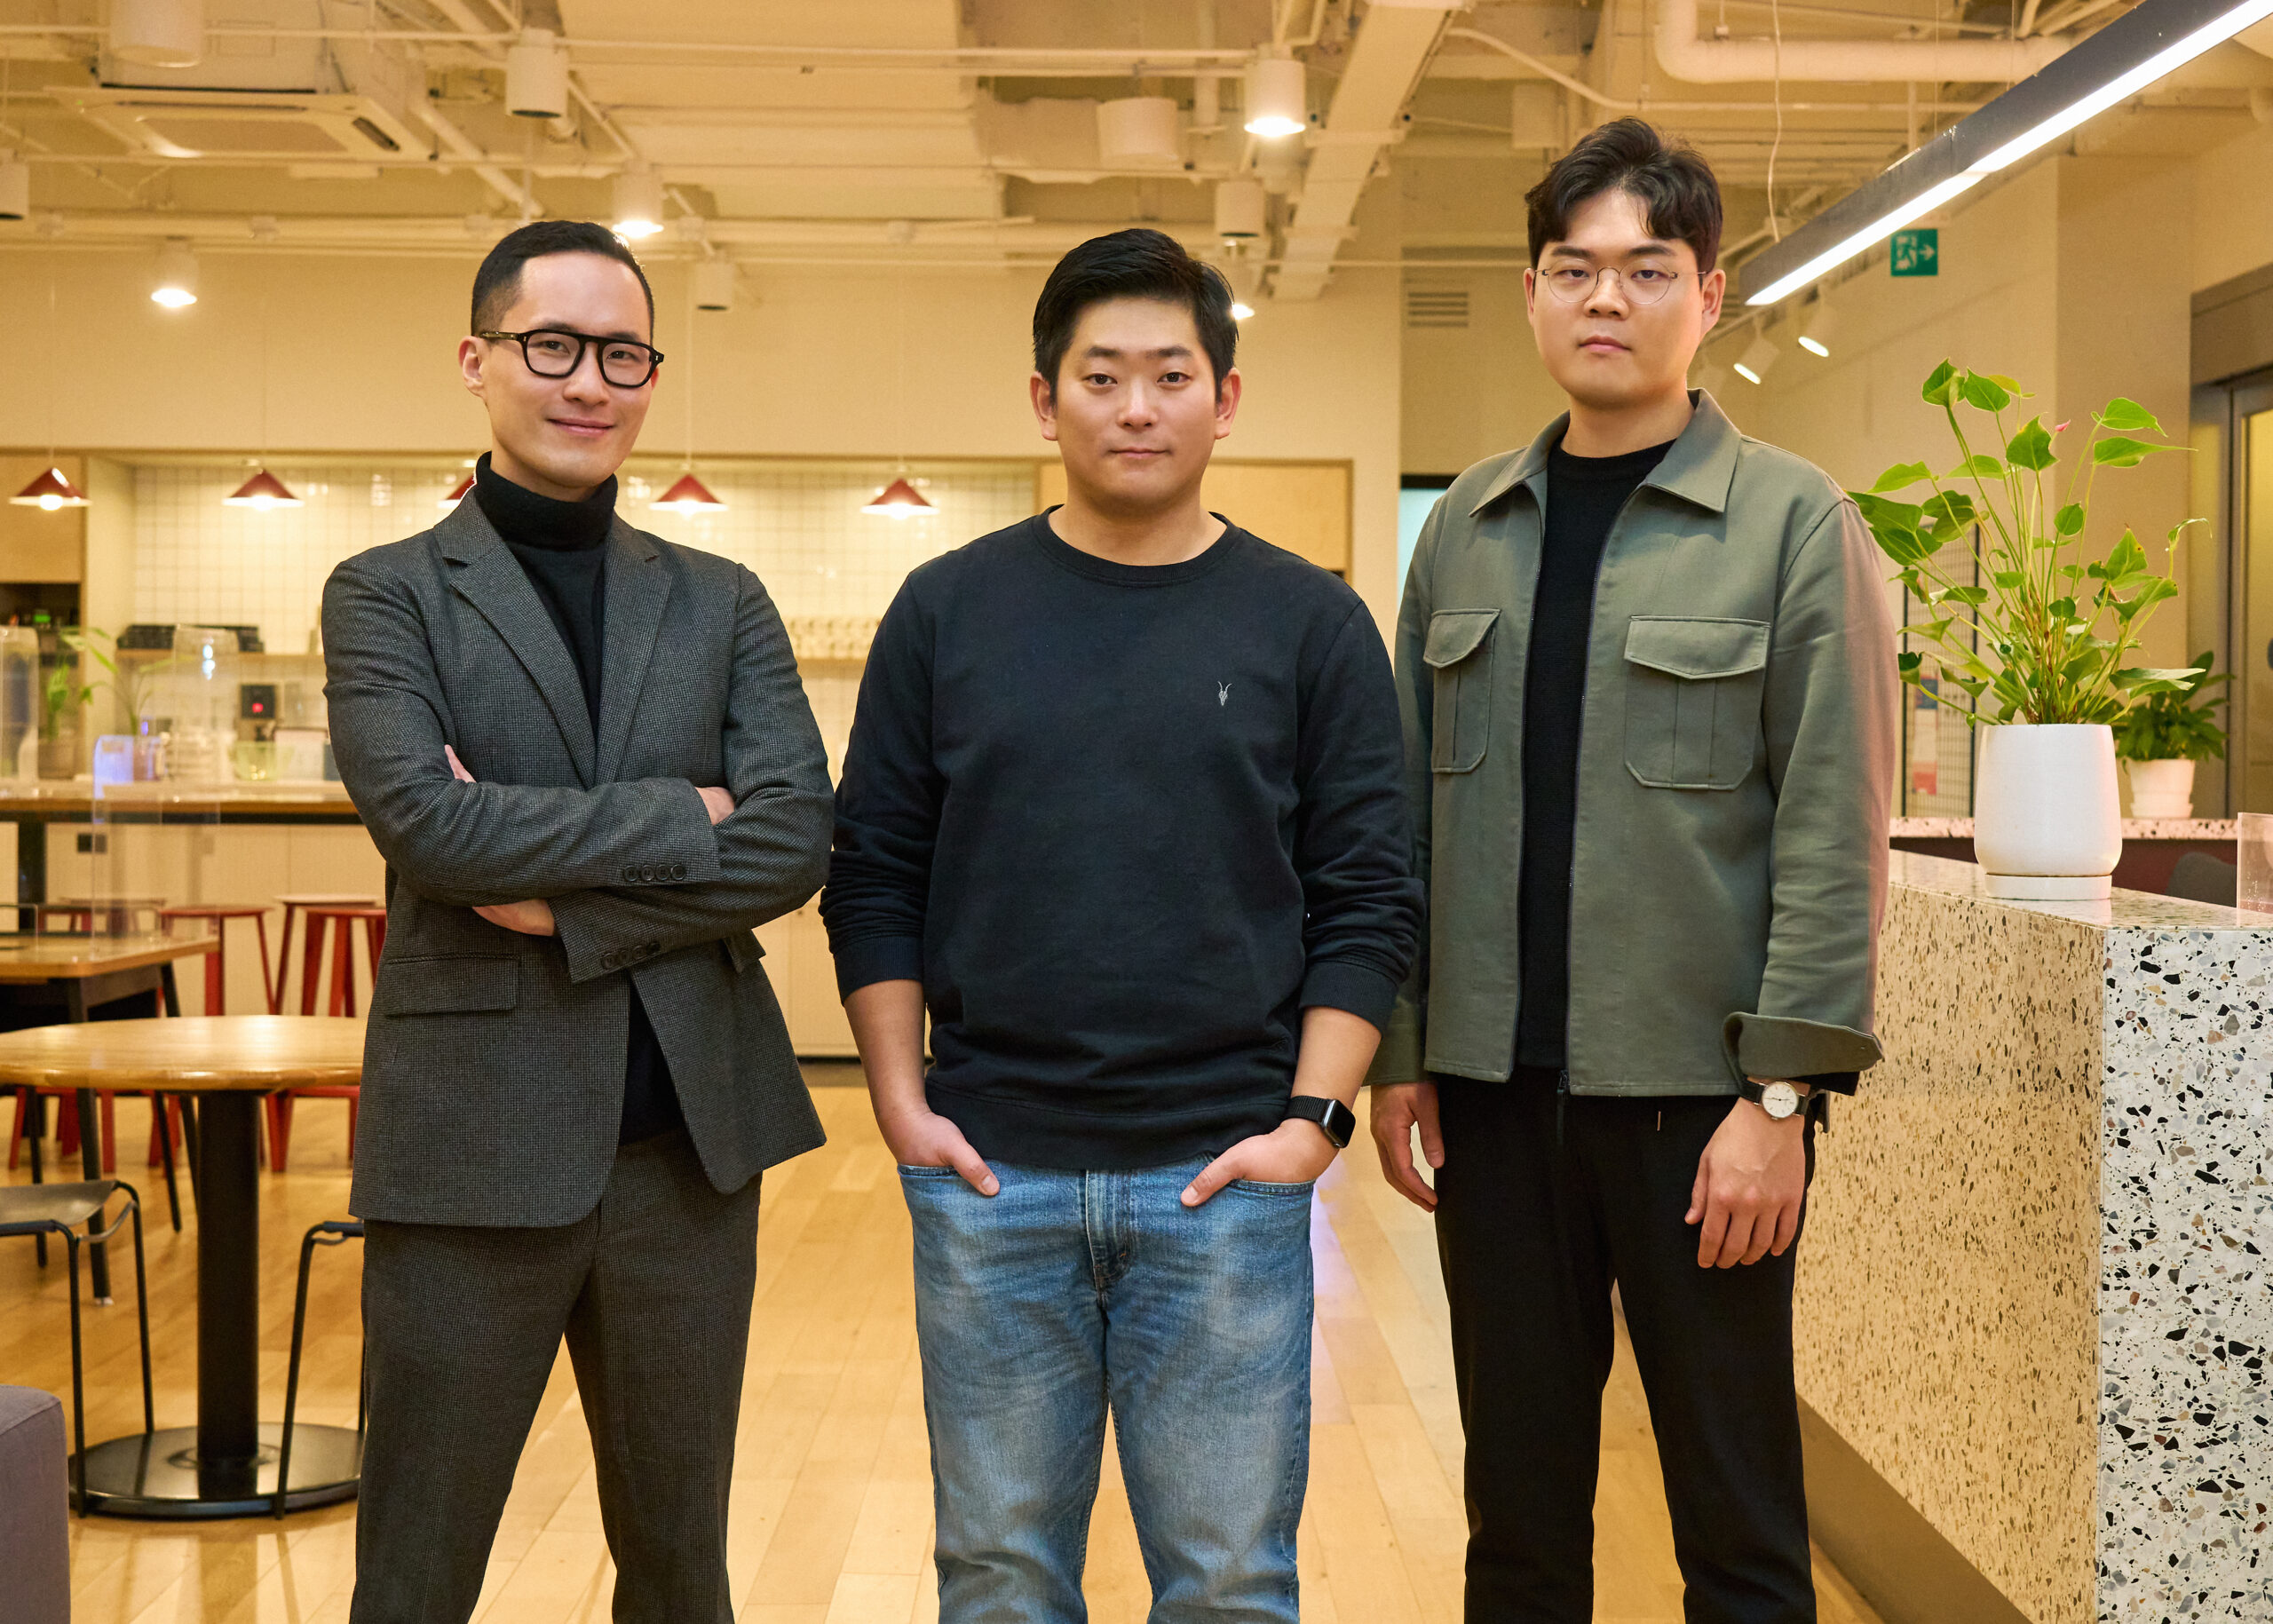 Relate, a promising B2B Korean startup, has introduced a cutting-edge CRM tool explicitly tailored for B2B startups